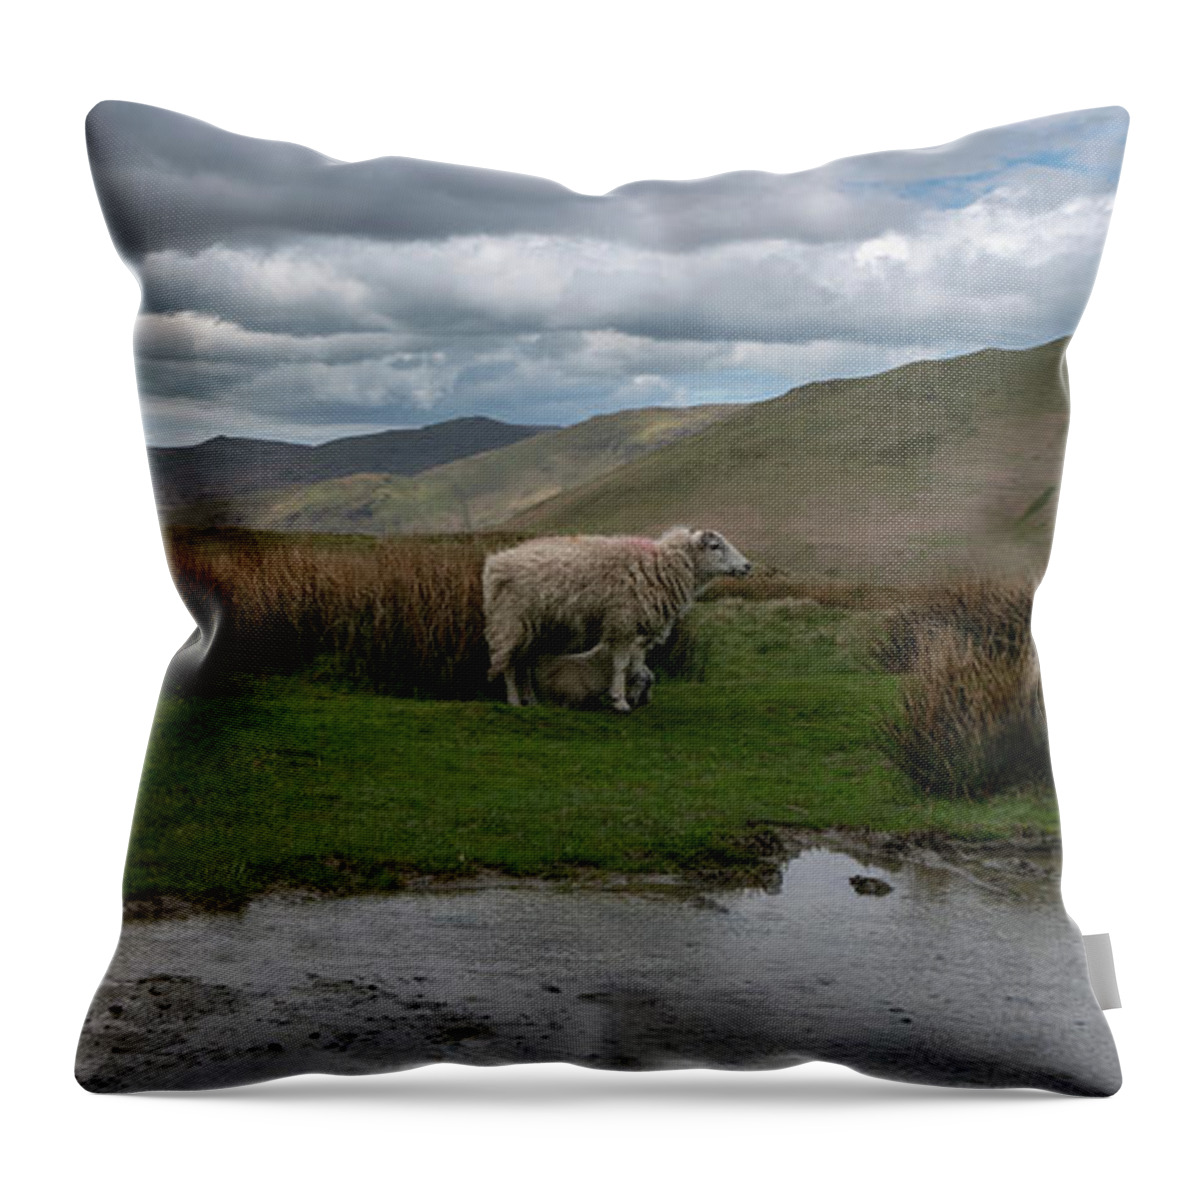 Sheep Throw Pillow featuring the photograph A sheep with her offspring at the side of the road in the mountains near Buttermere, England by Anges Van der Logt